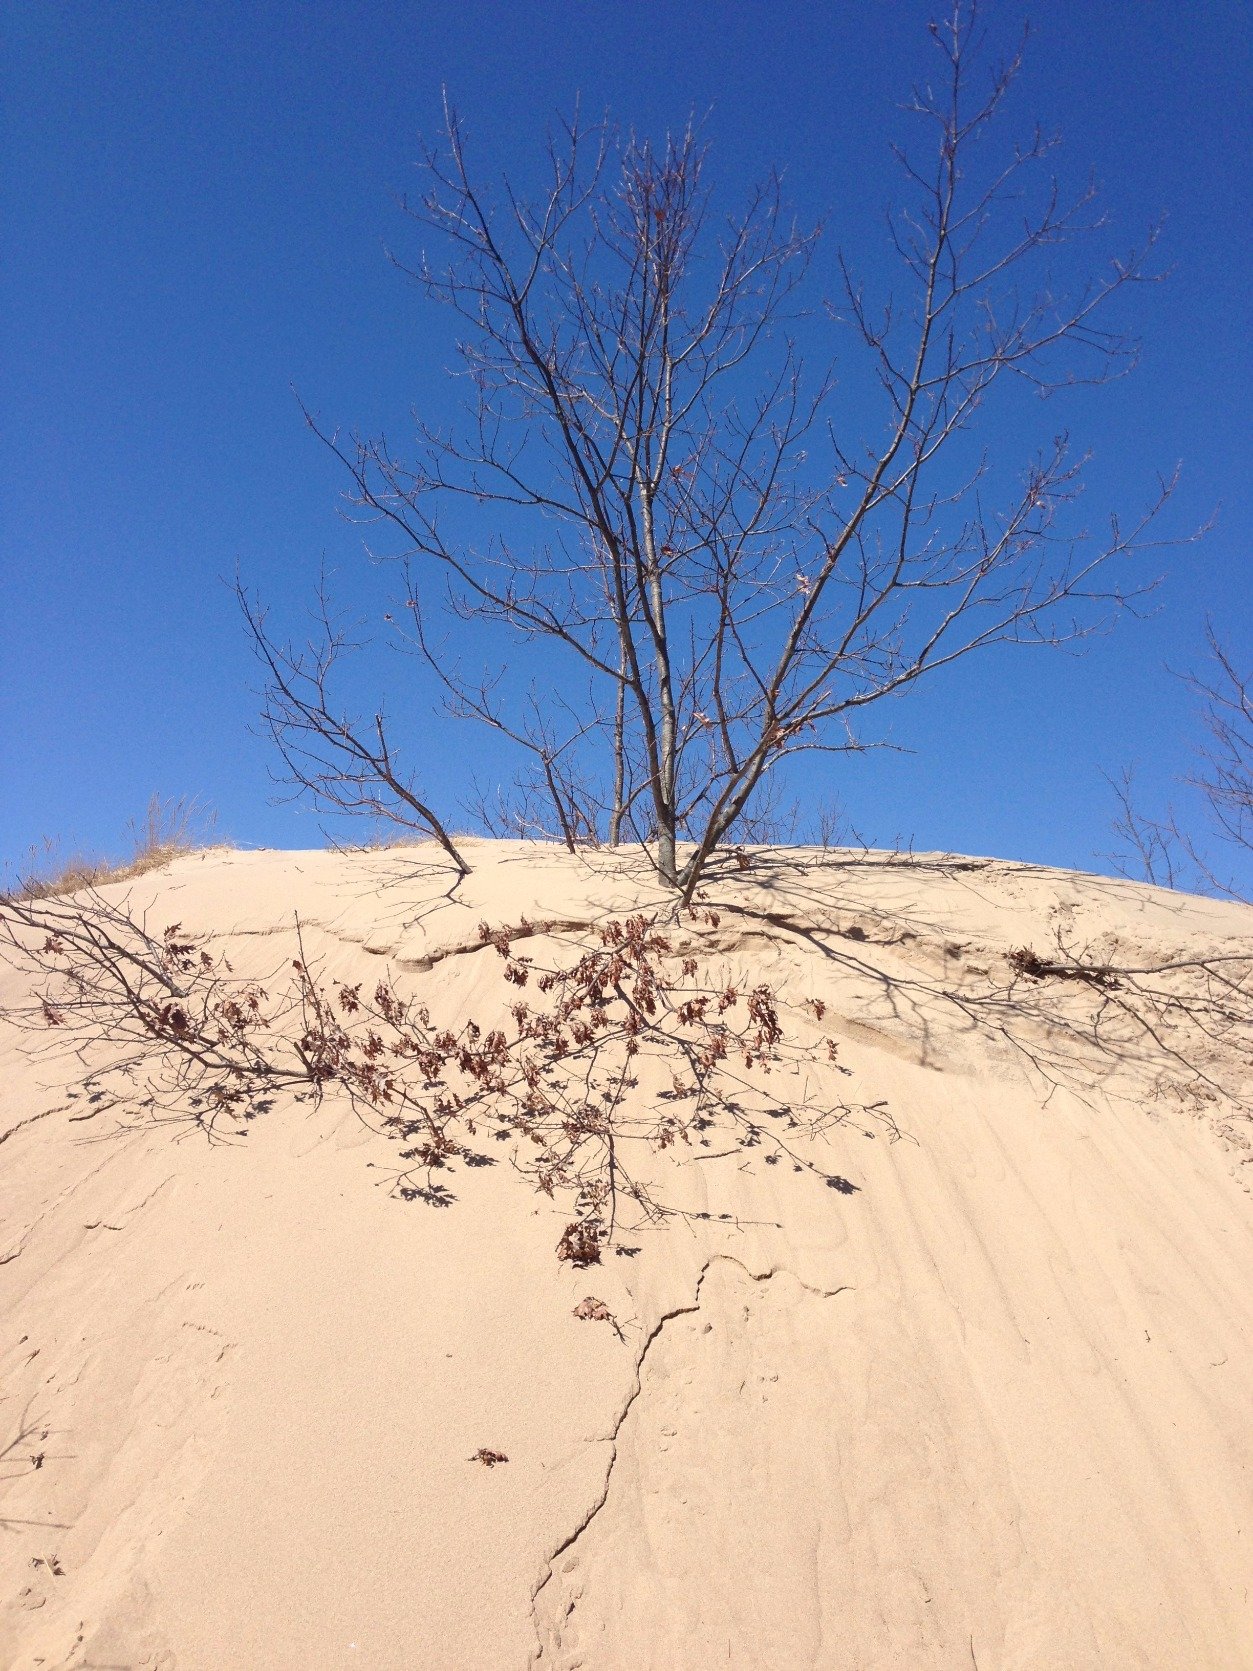 A coalition of individuals and organizations working cooperatively to protect and preserve the Saugatuck Dunes.